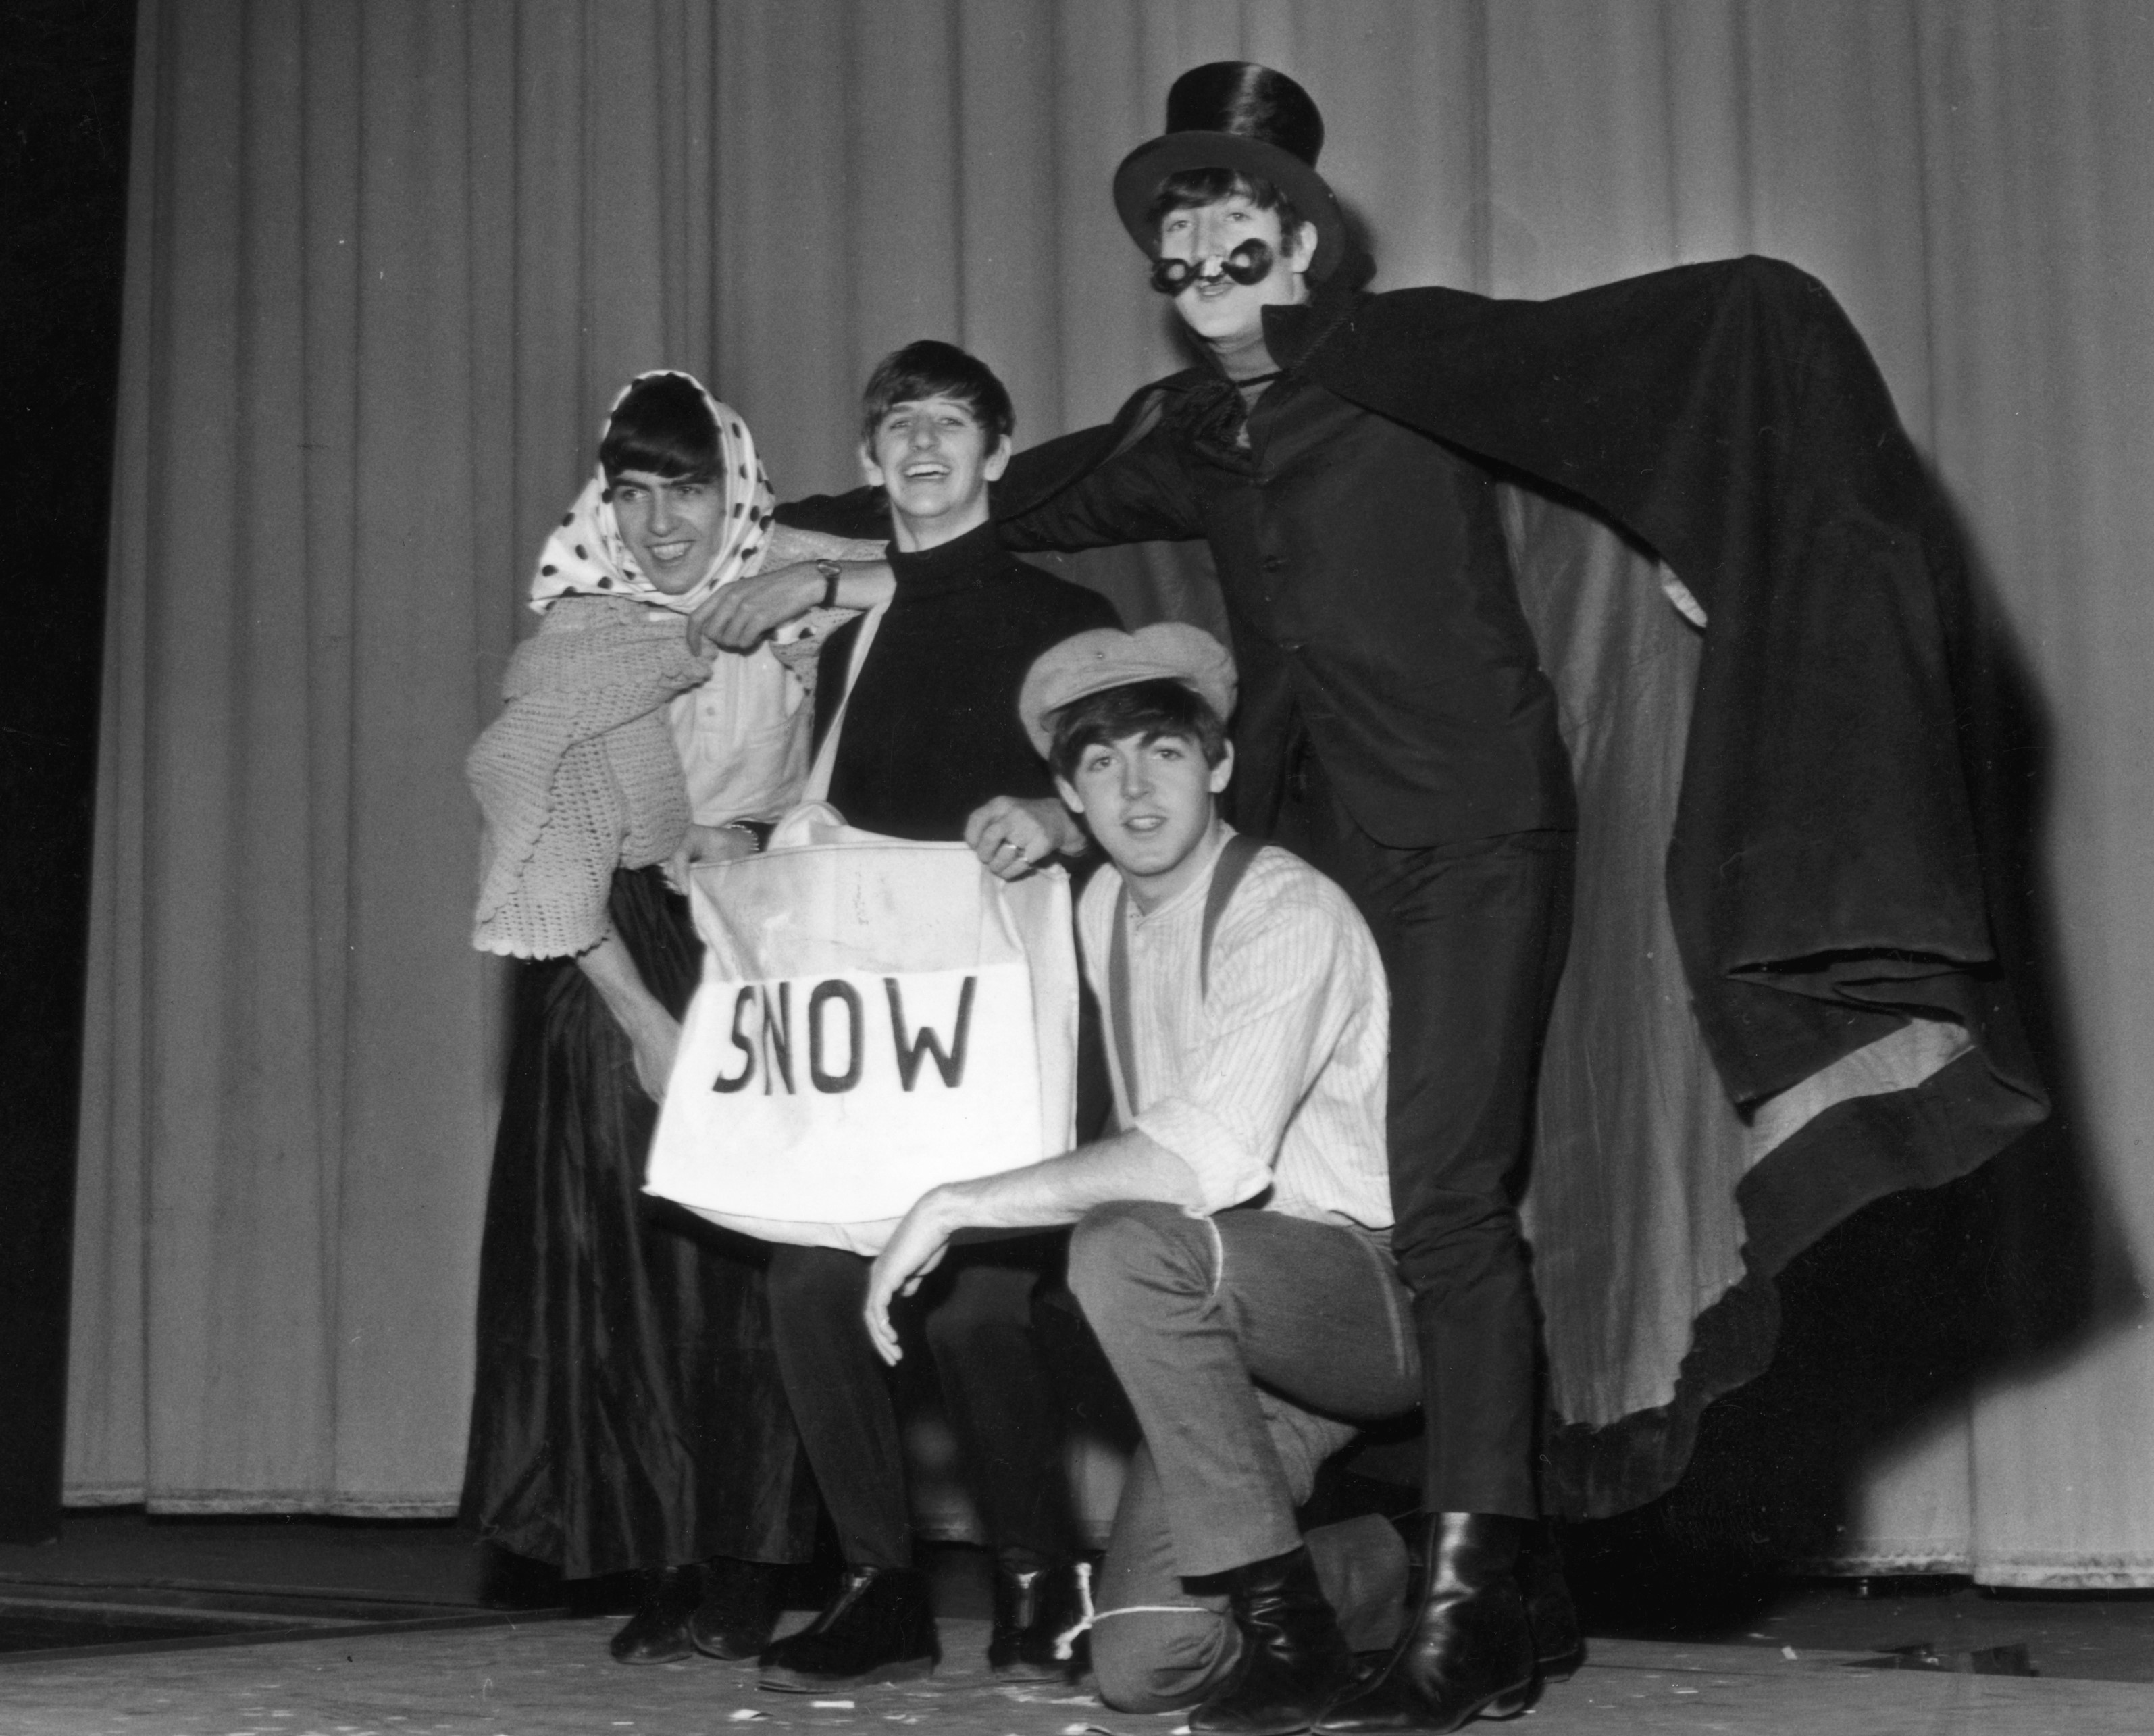 A black and white picture of George Harrison, Ringo Starr, Paul McCartney, and John Lennon dressed up for The Beatles' Christmas show.